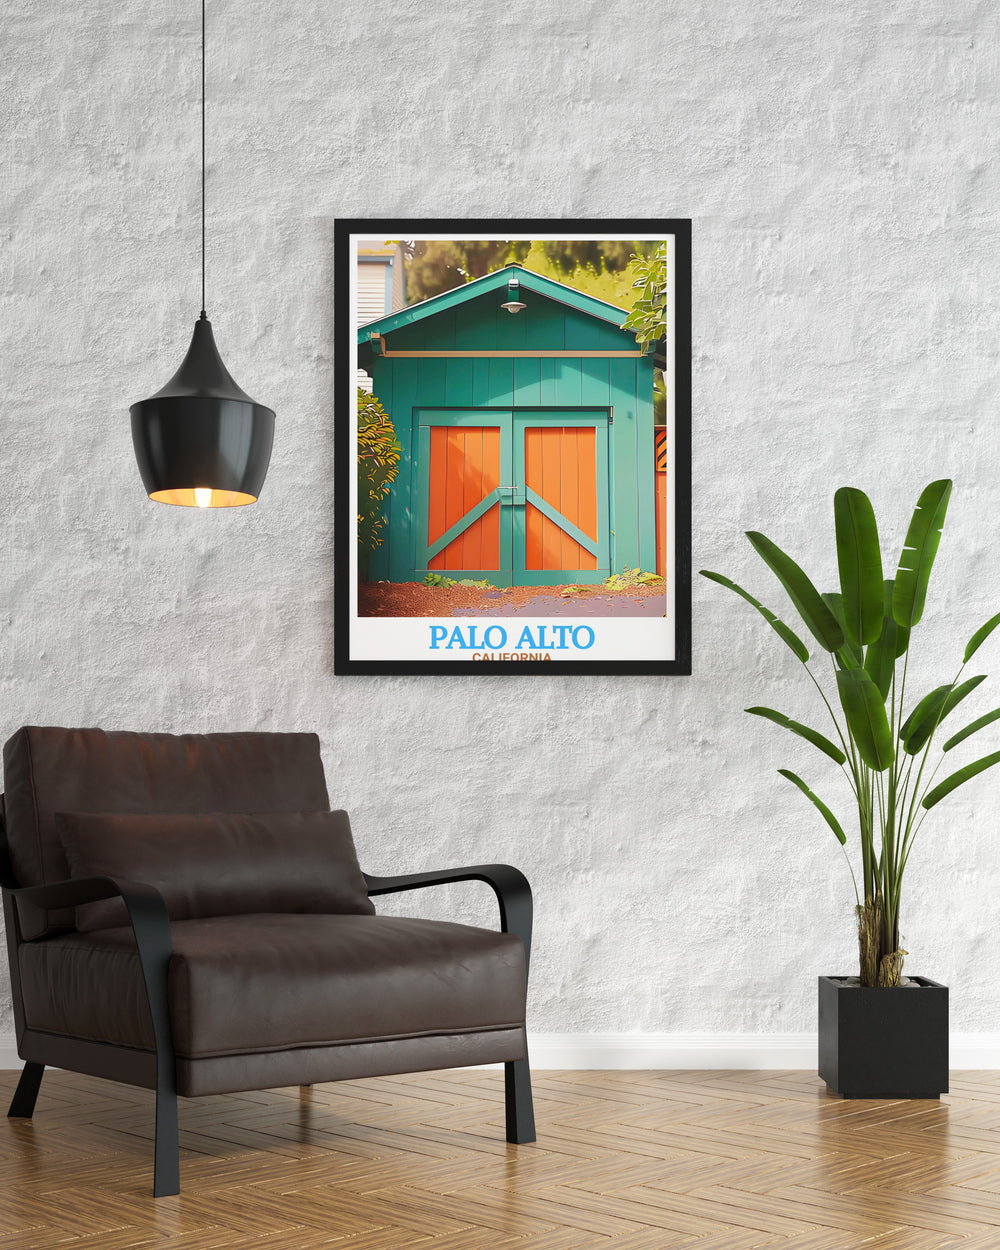 Digital download of Palo Alto skyline including the Hewlett Packard Garage. Ideal for those who appreciate Palo Altos tech heritage, this poster offers a detailed cityscape with the historic Hewlett Packard Garage in a modern art style.